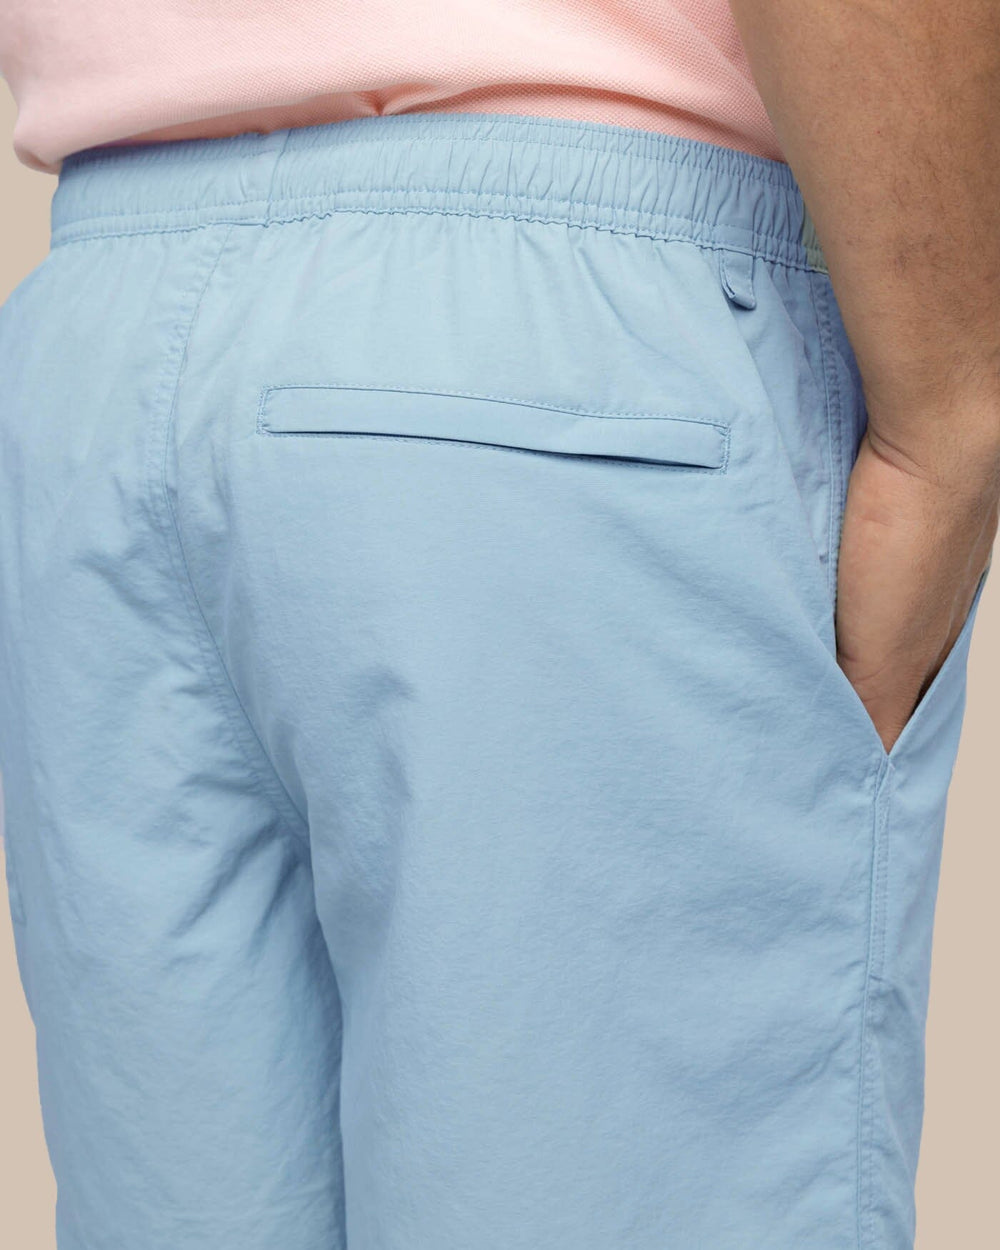 The detail view of the Southern Tide Shoreline 6 Nylon Short by Southern Tide - Windward Blue